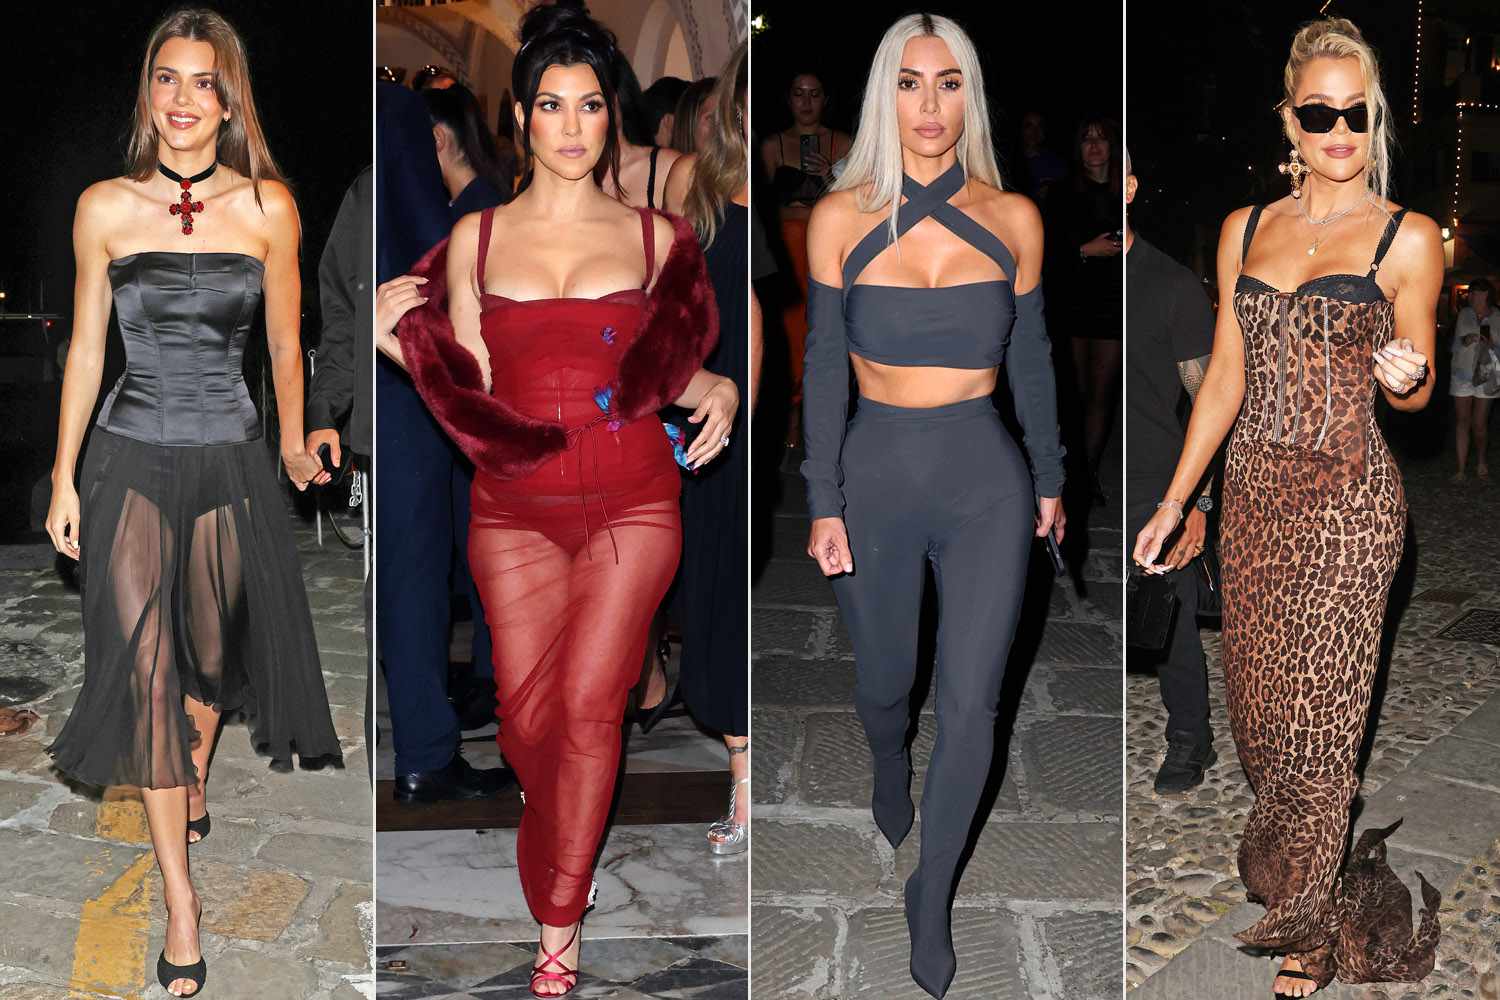 Kardashian-Jenners Show Off Unique Takes on Gothic Glam for Kourtney and Travis Barker’s Wedding